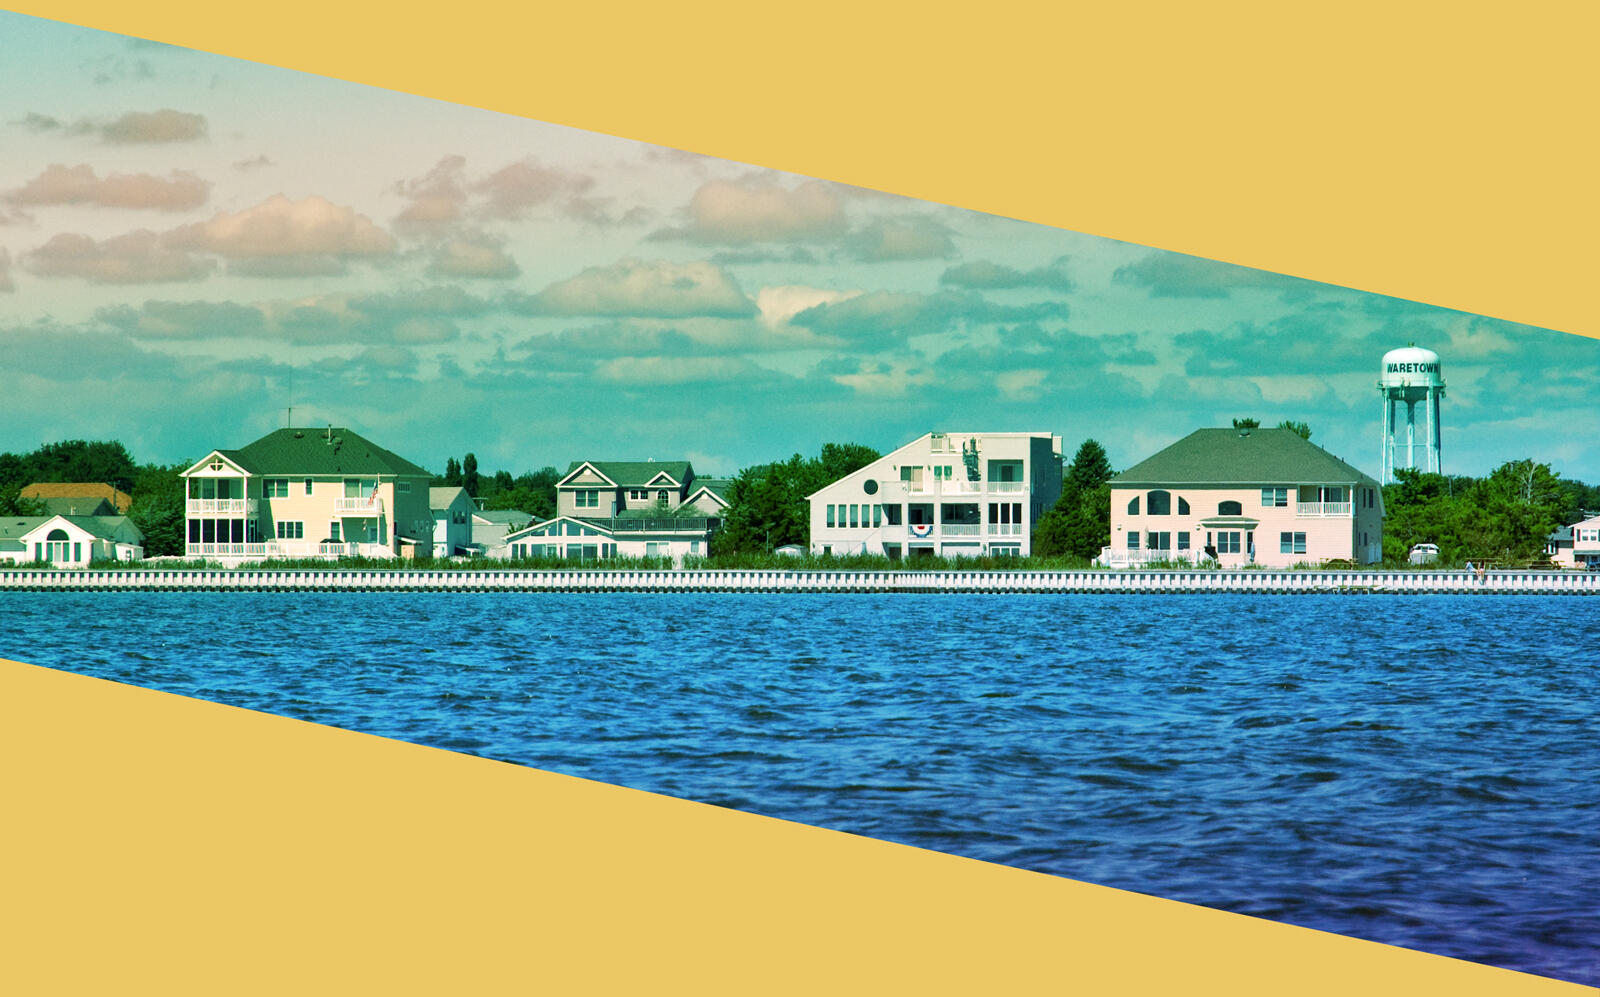 Cape Cod and the Jersey Shore suffered among the sharpest inventory declines. (iStock)